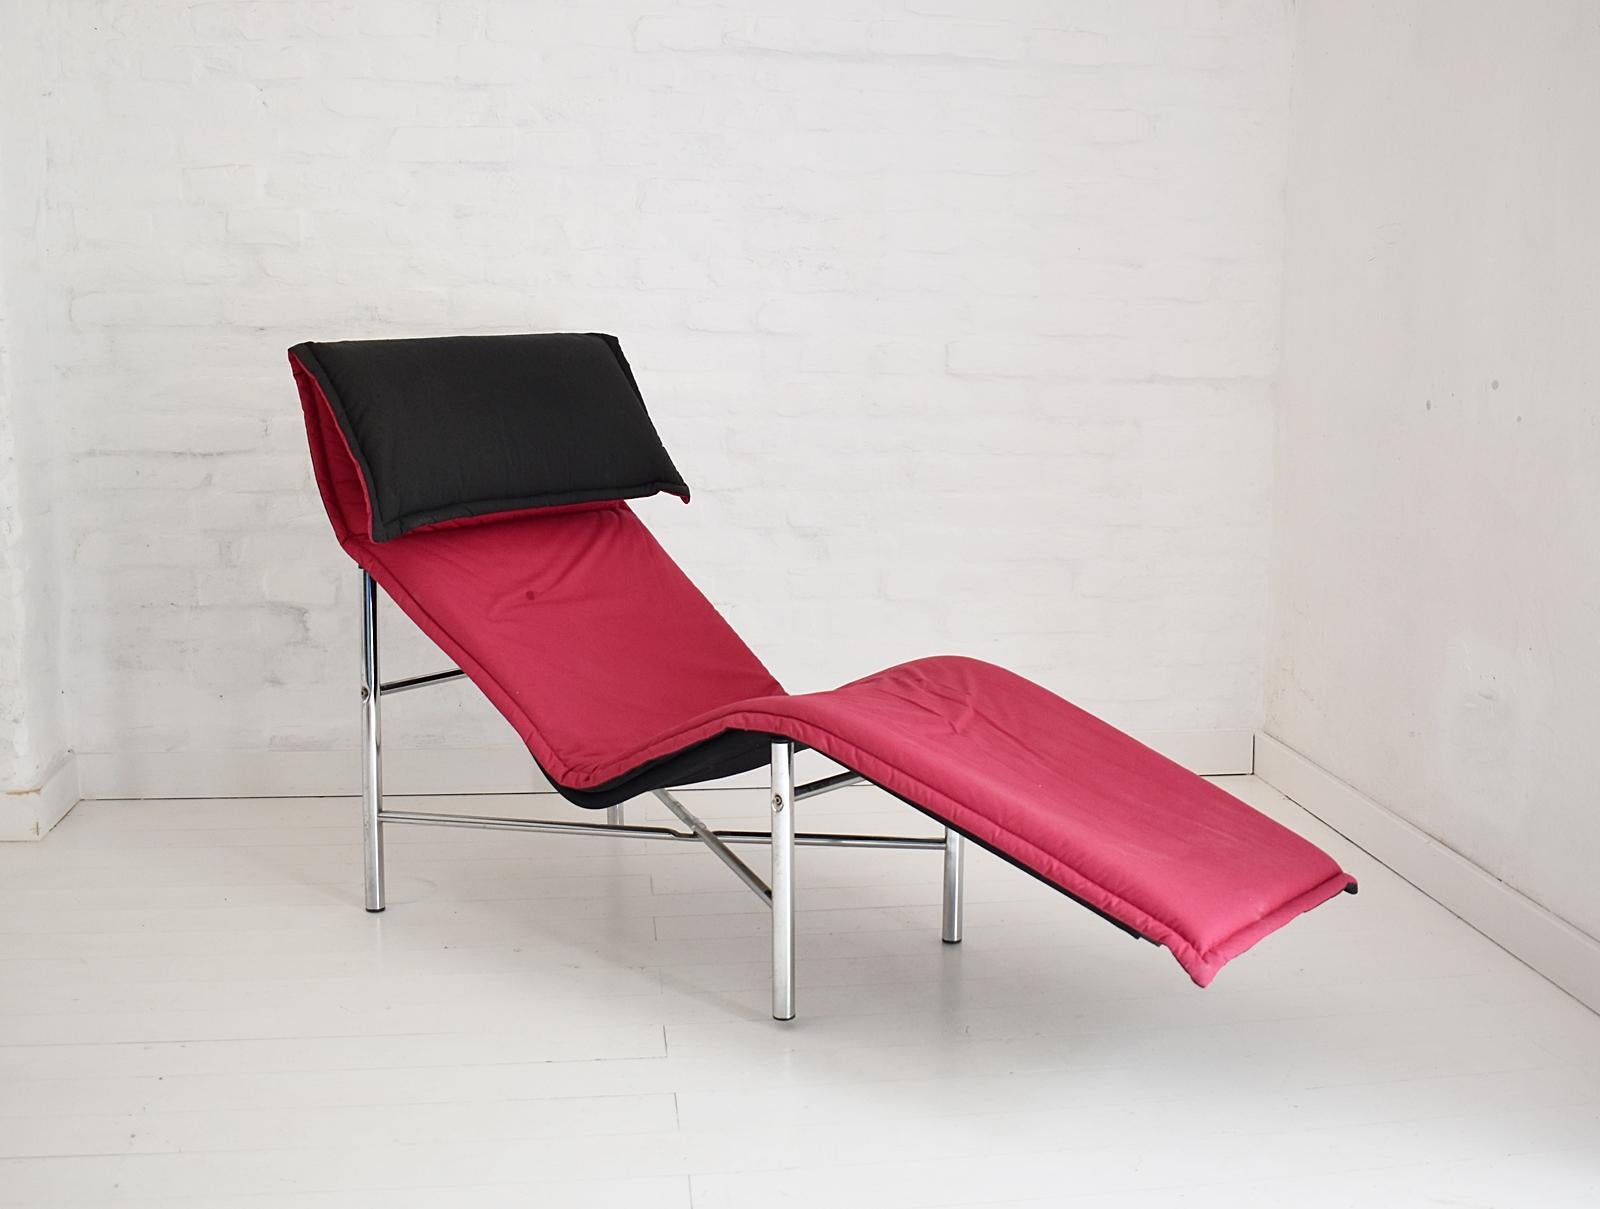 The Skye lounger was created by Swedish designer Tord Björklund for Ikea This chair features a dark pink and black upholstered cushion on chrome frame base. In very good original condition.